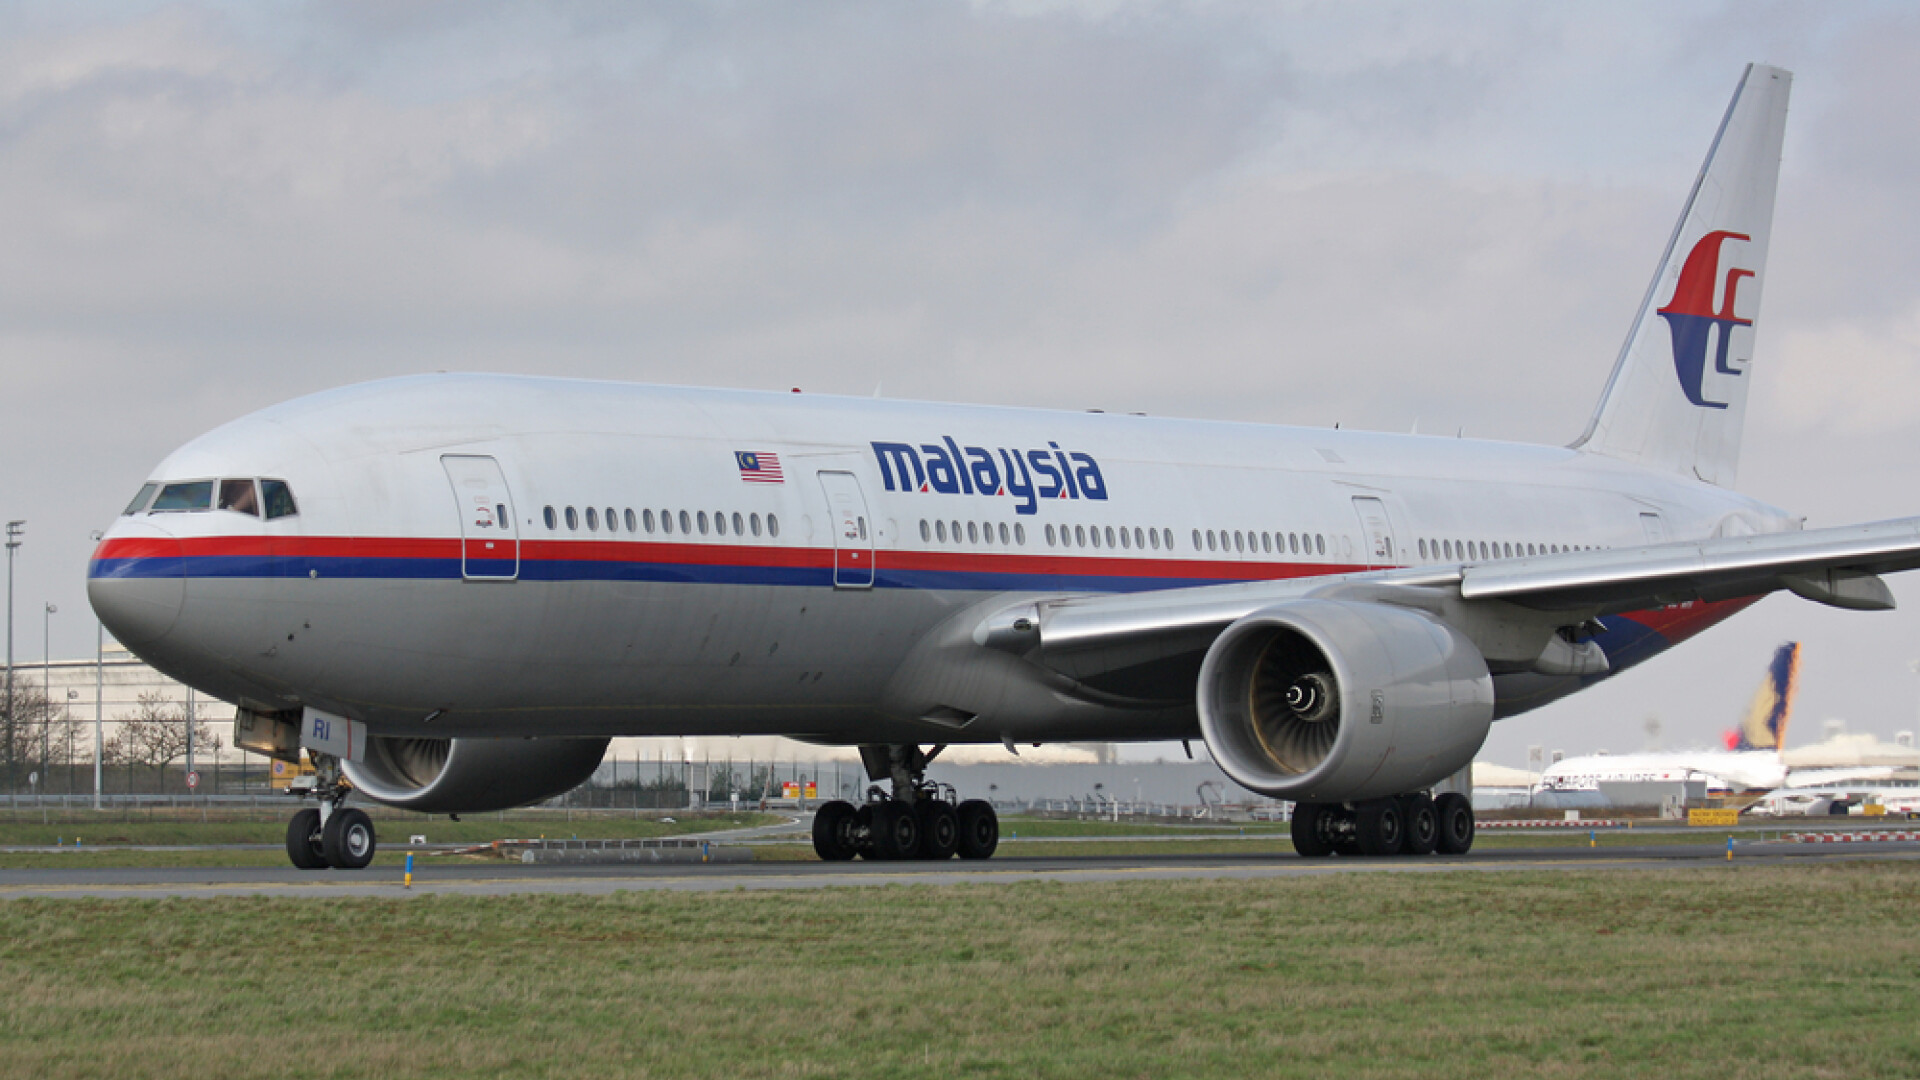 Malaysia Airlines - Shutterstock